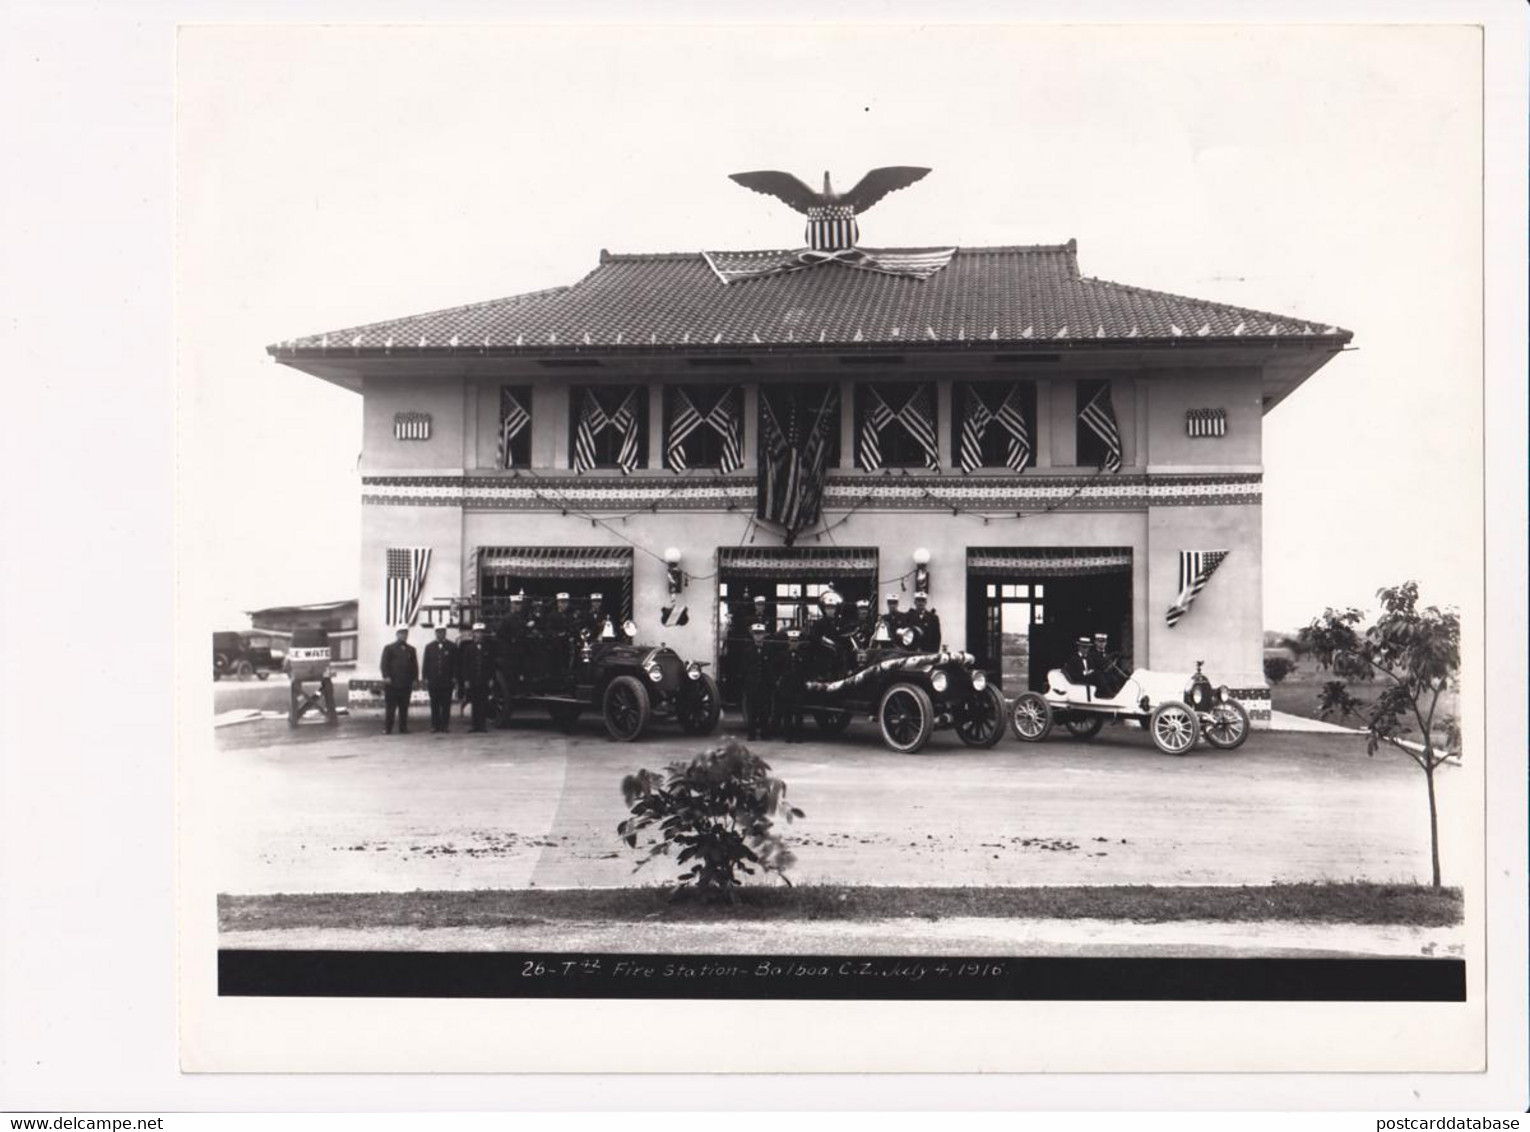 Fire Station - Balboa Canal Zone - Panama - Large Photo - & Fire Station, Old Cars - Professions